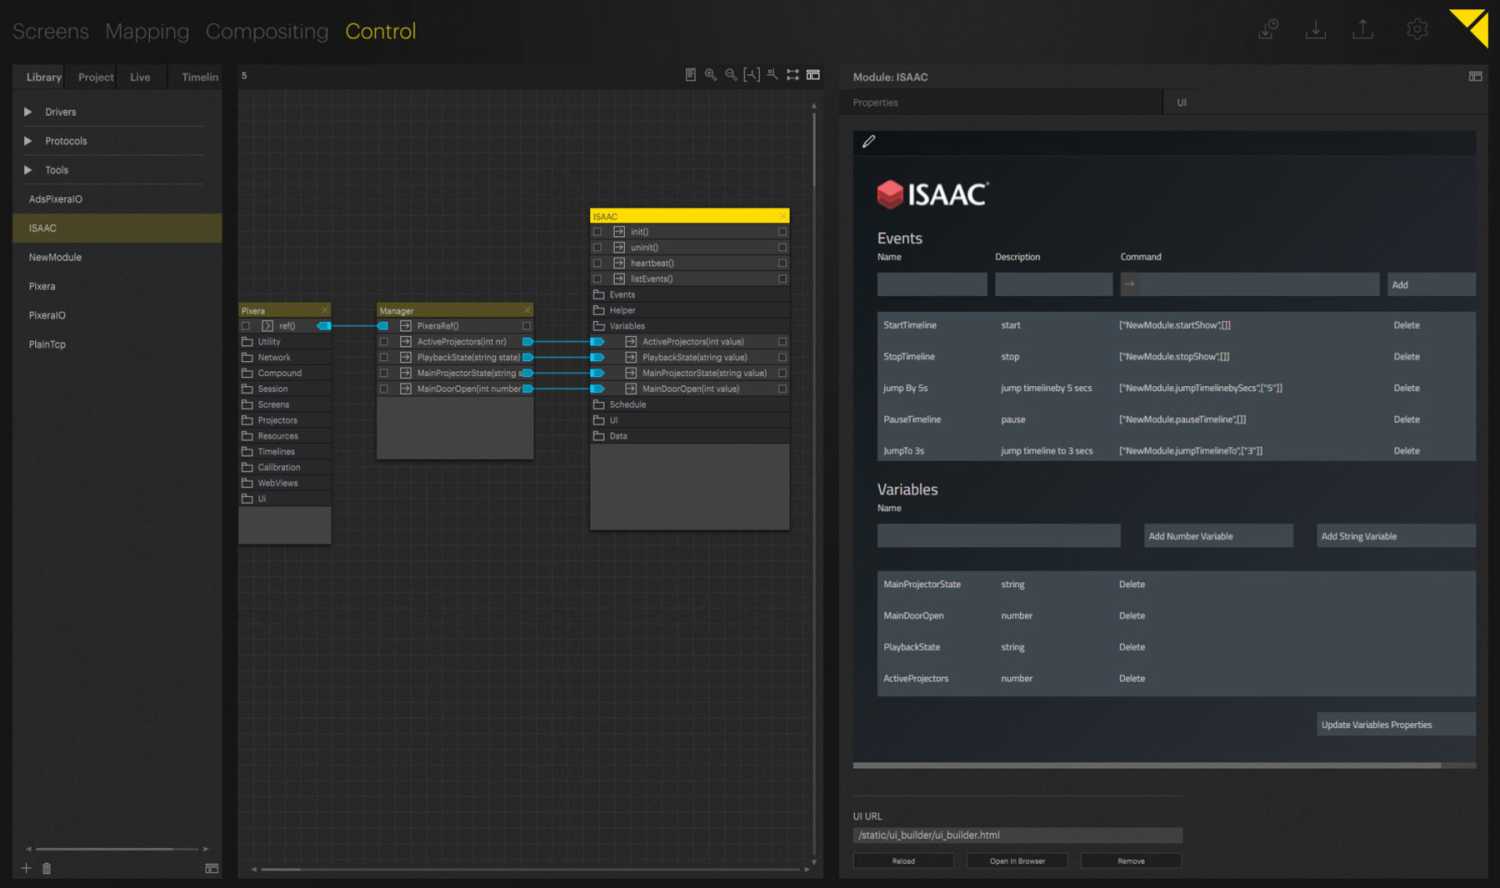 ISAAC events can be created and synched with the ISAAC calendar directly from within the Pixera control interface